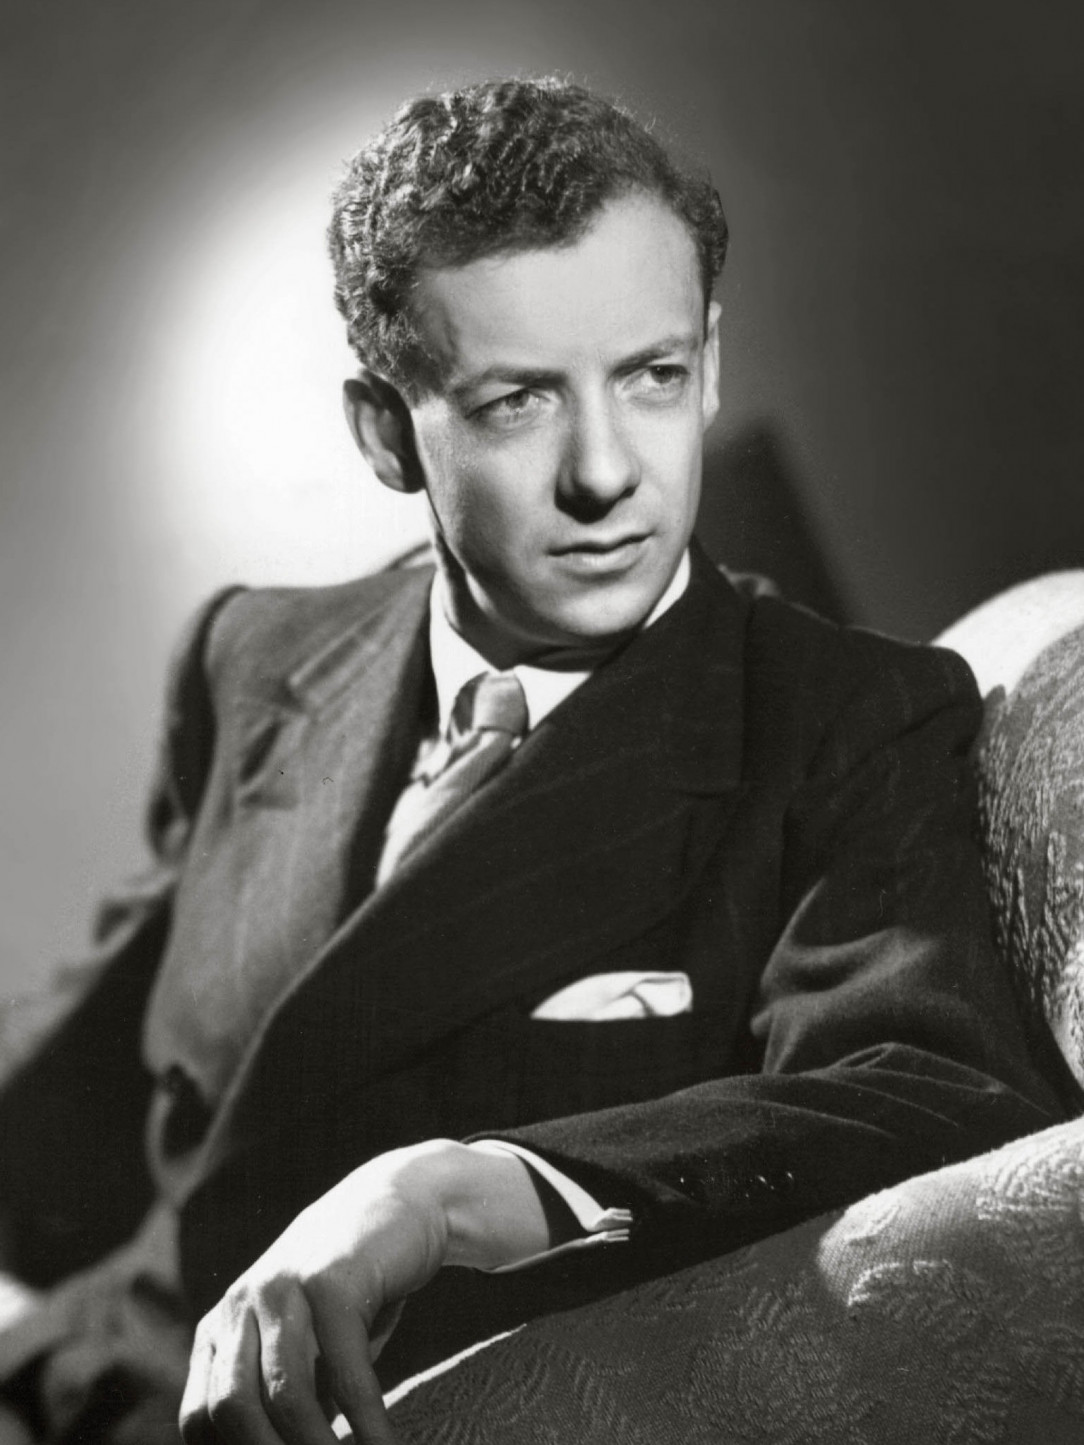 OTD [November 22, 1913], English composer Benjamin Britten was born. What are your favorite works?